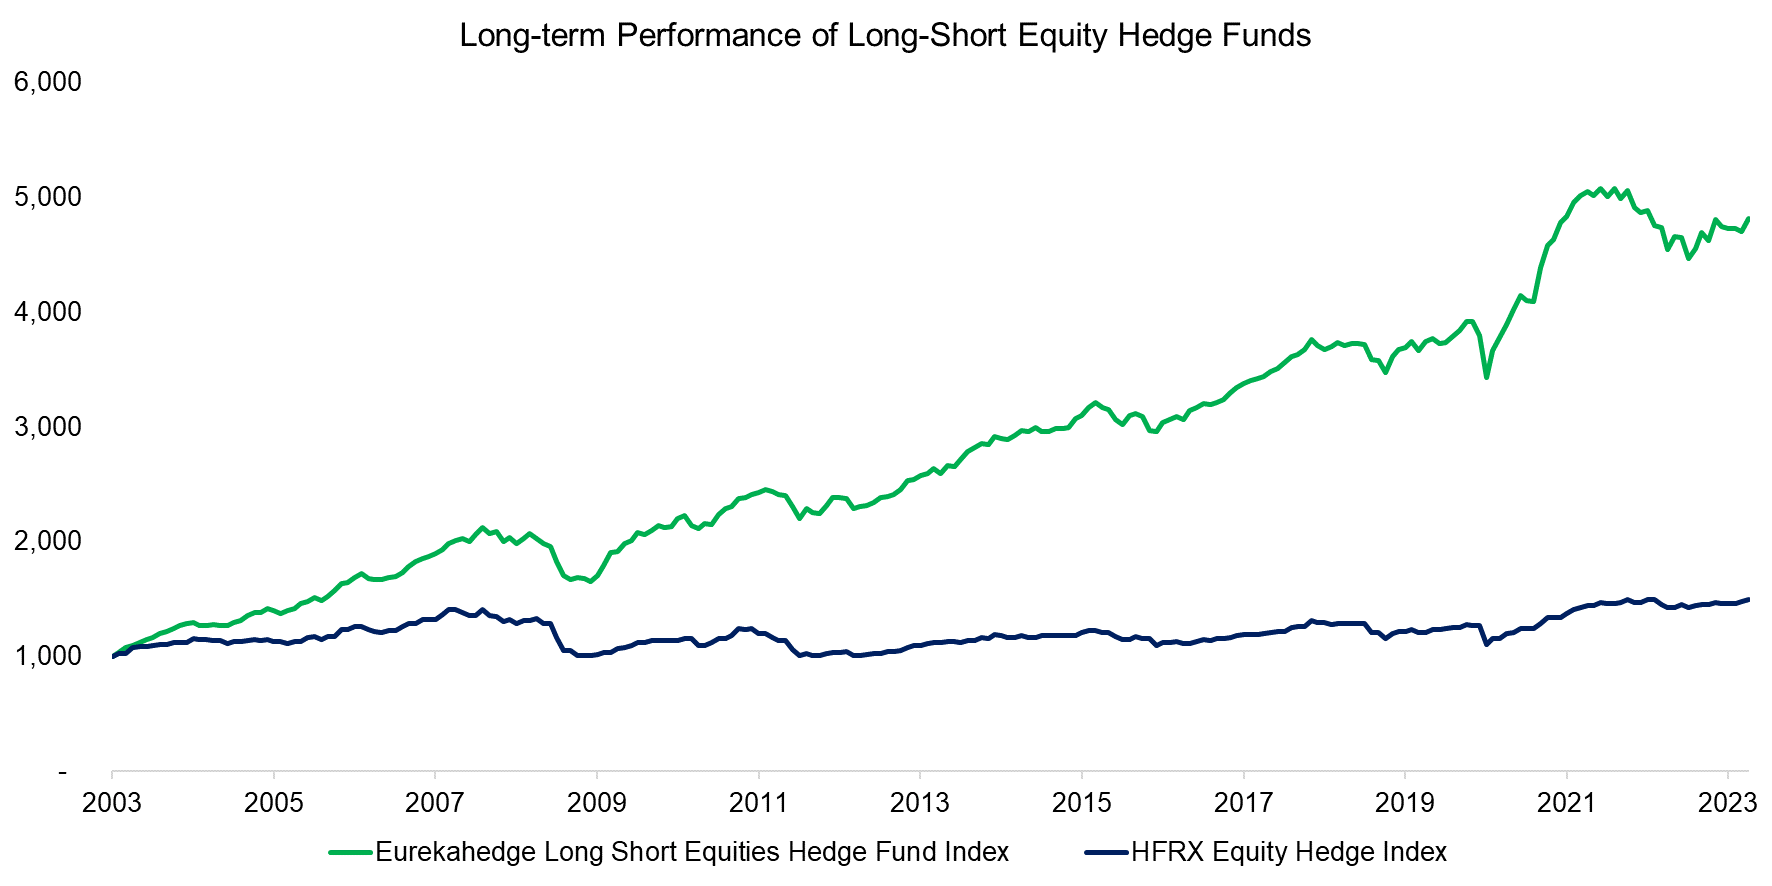 Long-term Performance of Long-Short Equity Hedge Funds